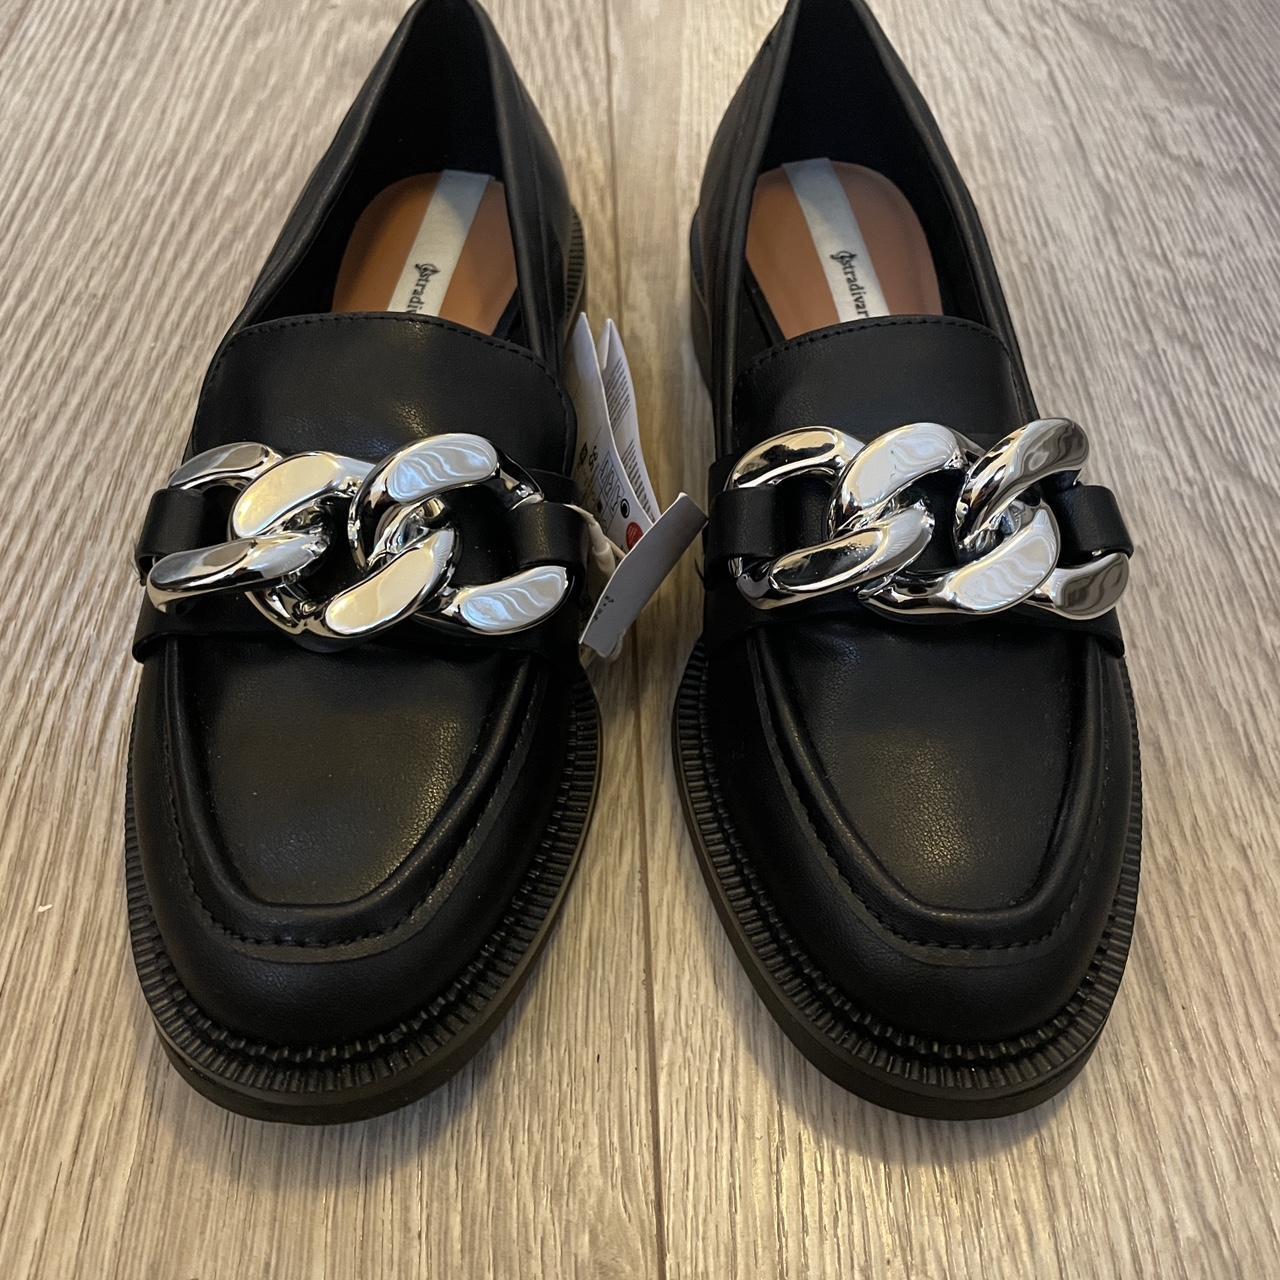 Stradivarius Black loafers with chain detail RRP... - Depop